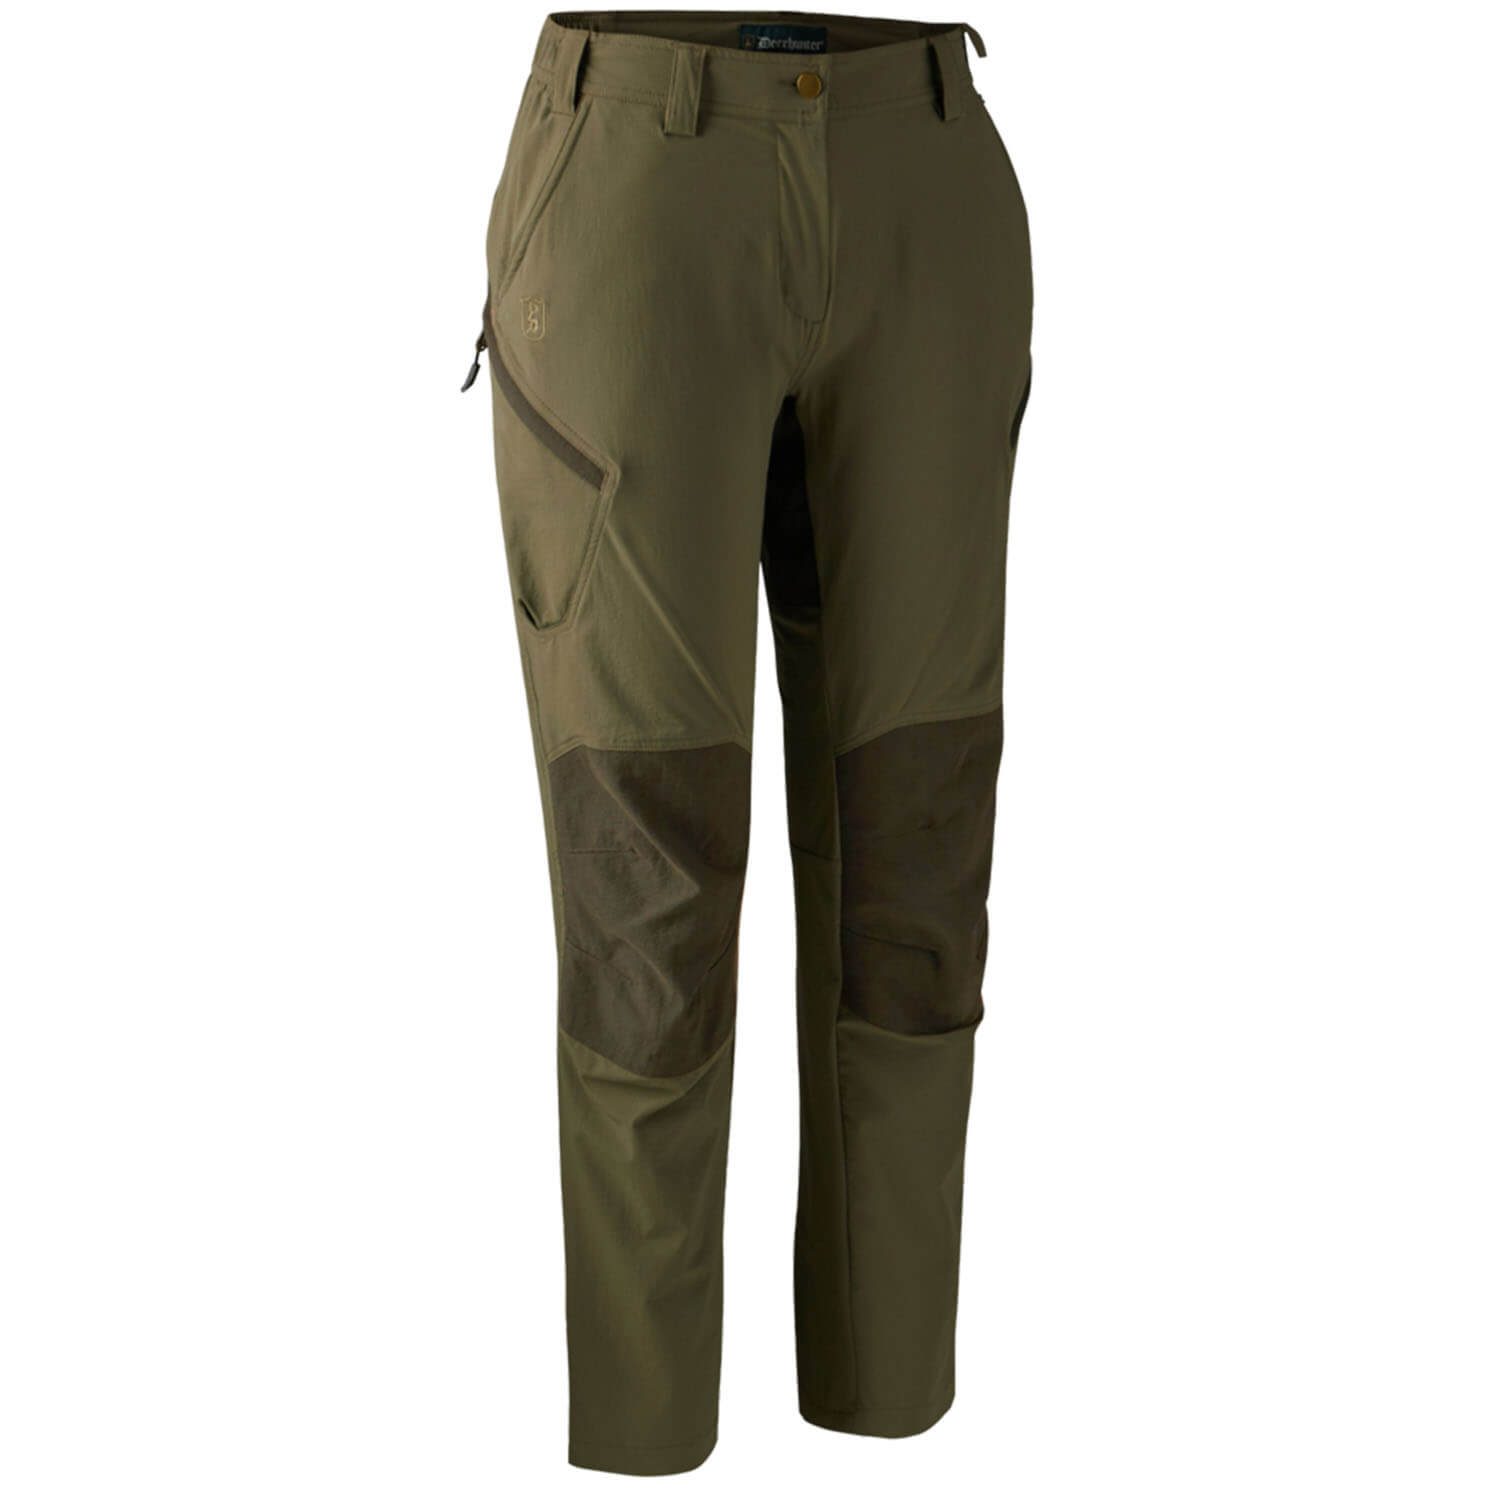 Deerhunter Trousers Lady Anti-Insect - Hunting Trousers